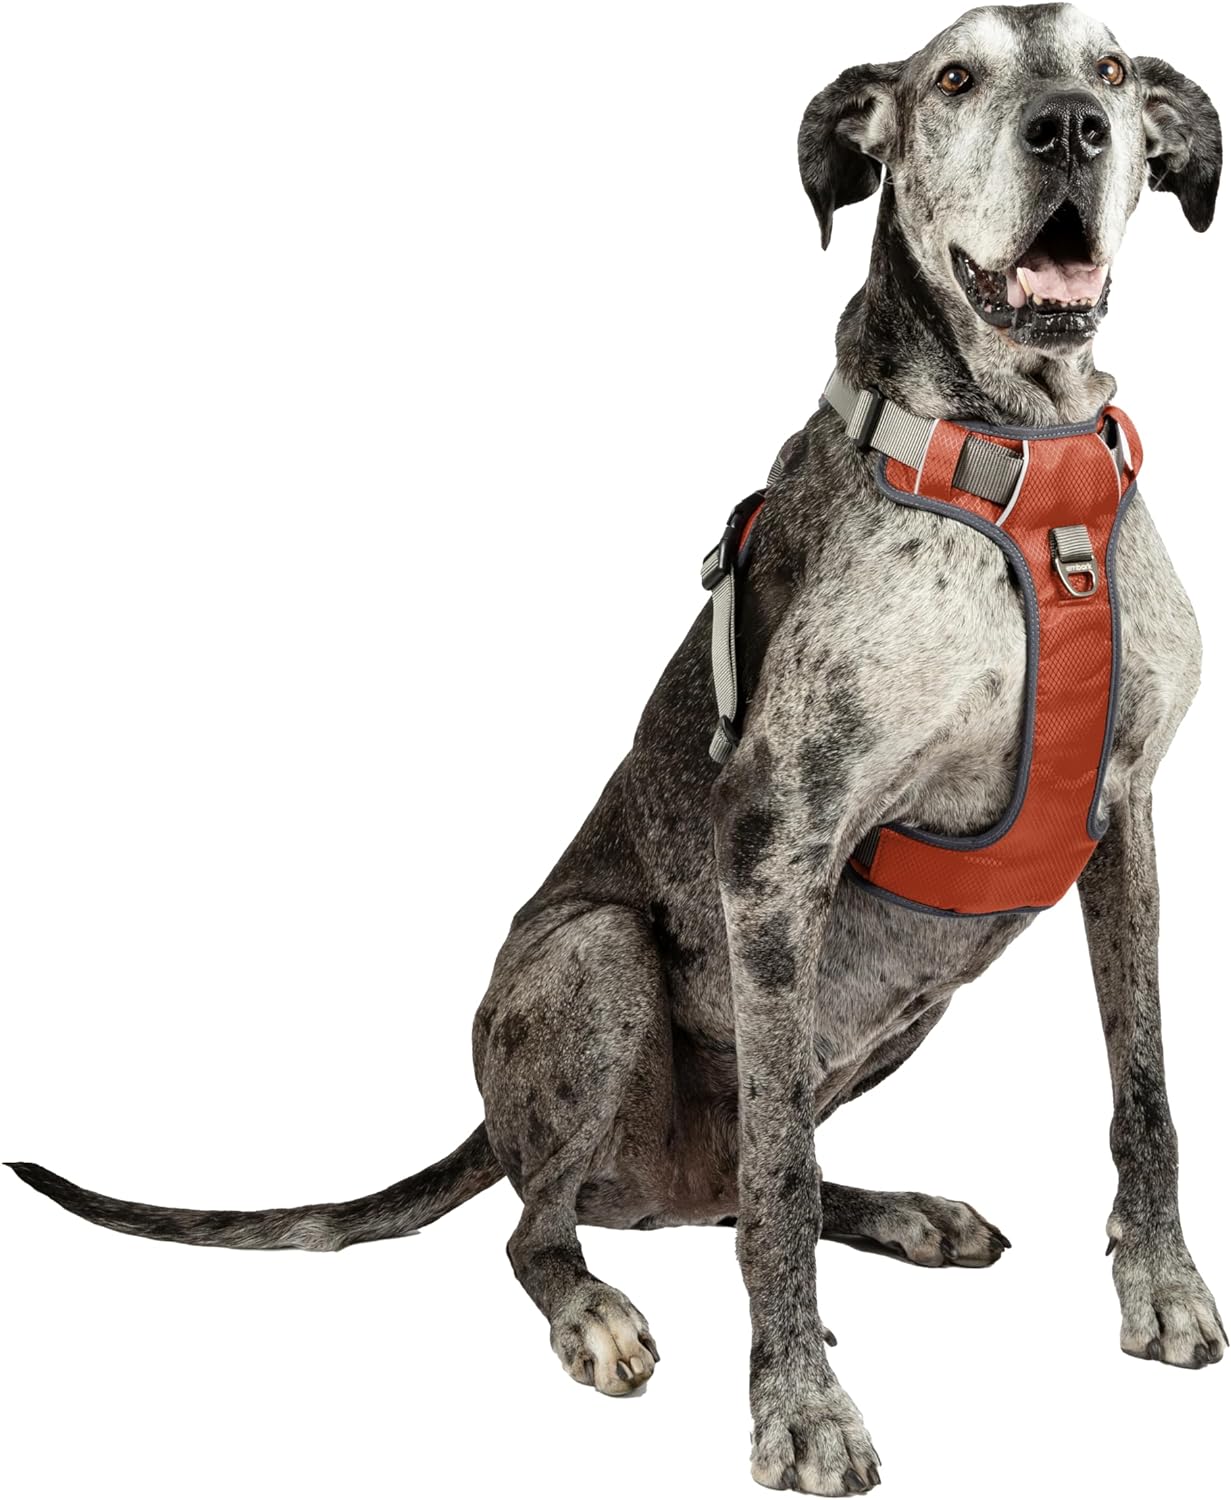 Embark Adventure XL Dog Harness No-Pull Dog Harnesses for Extra Large, Medium and Small Dogs. 2 Leash Clips, Front  Back with Control Handle, Adjustable Orange Dog Vest, Soft  Padded for Comfort